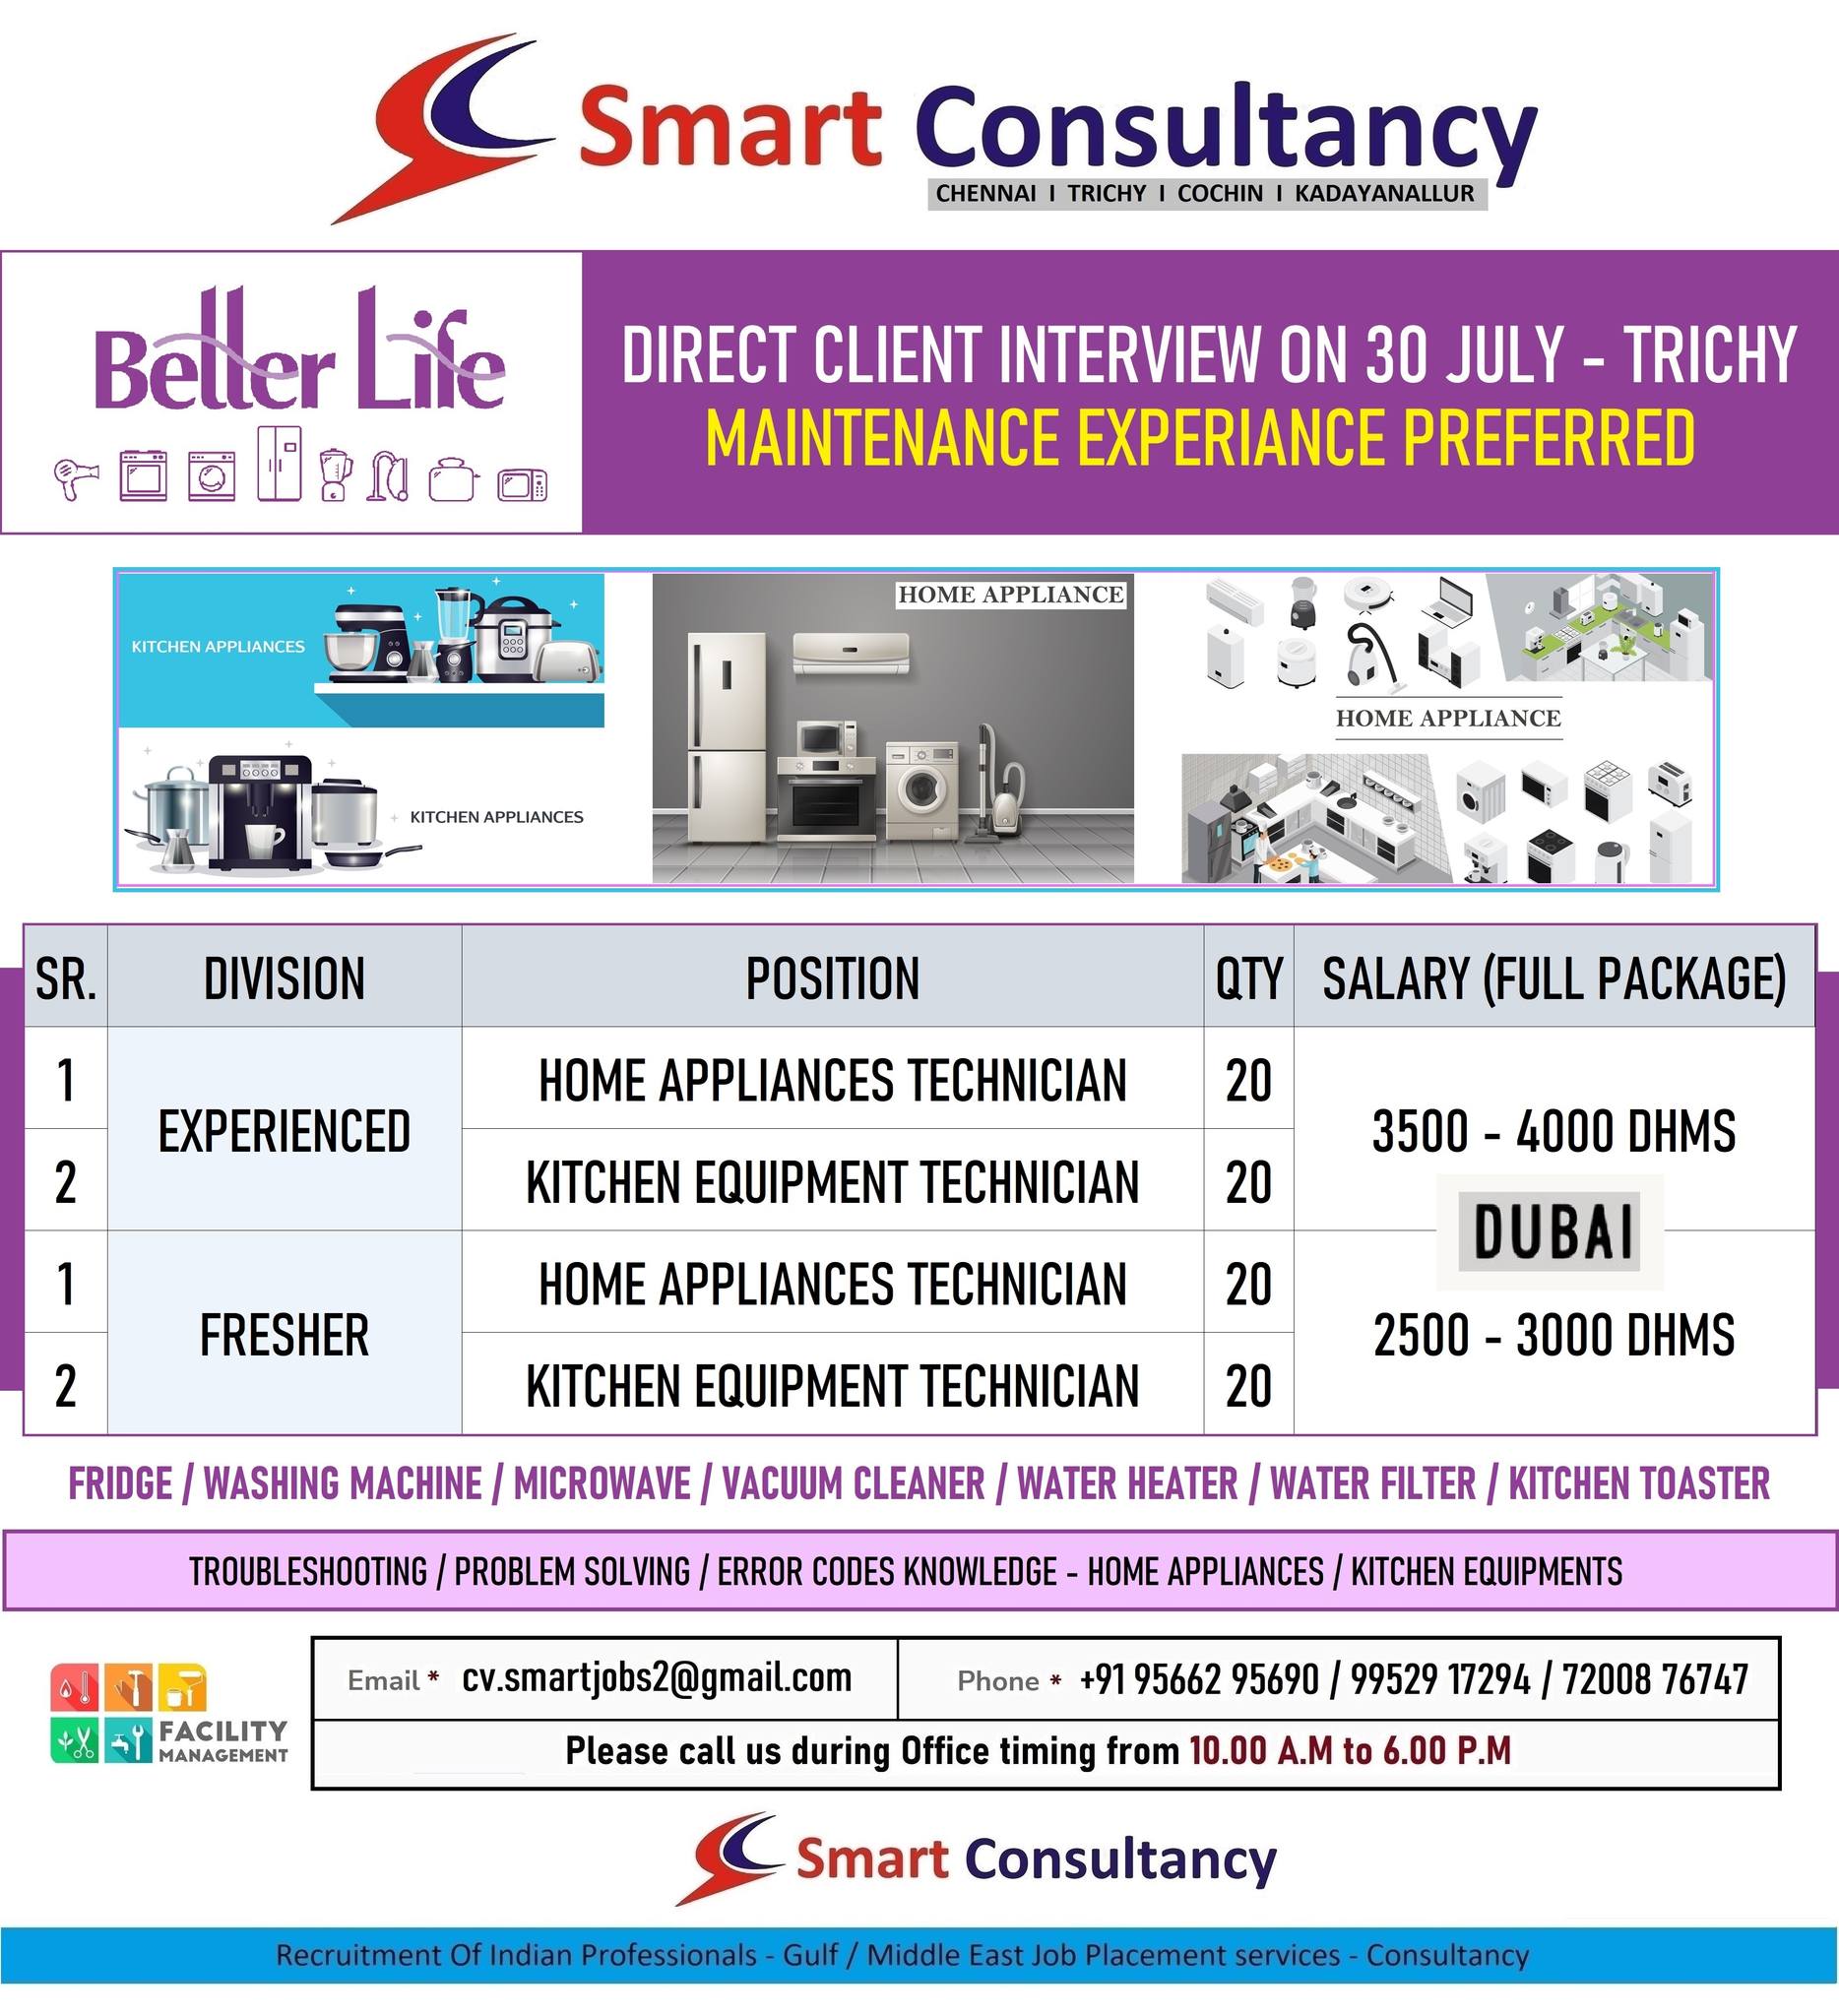 BETTER LIFE (DUBAI) – DIRECT CLIENT INTERVIEW ON 30 JULY – TRICHY